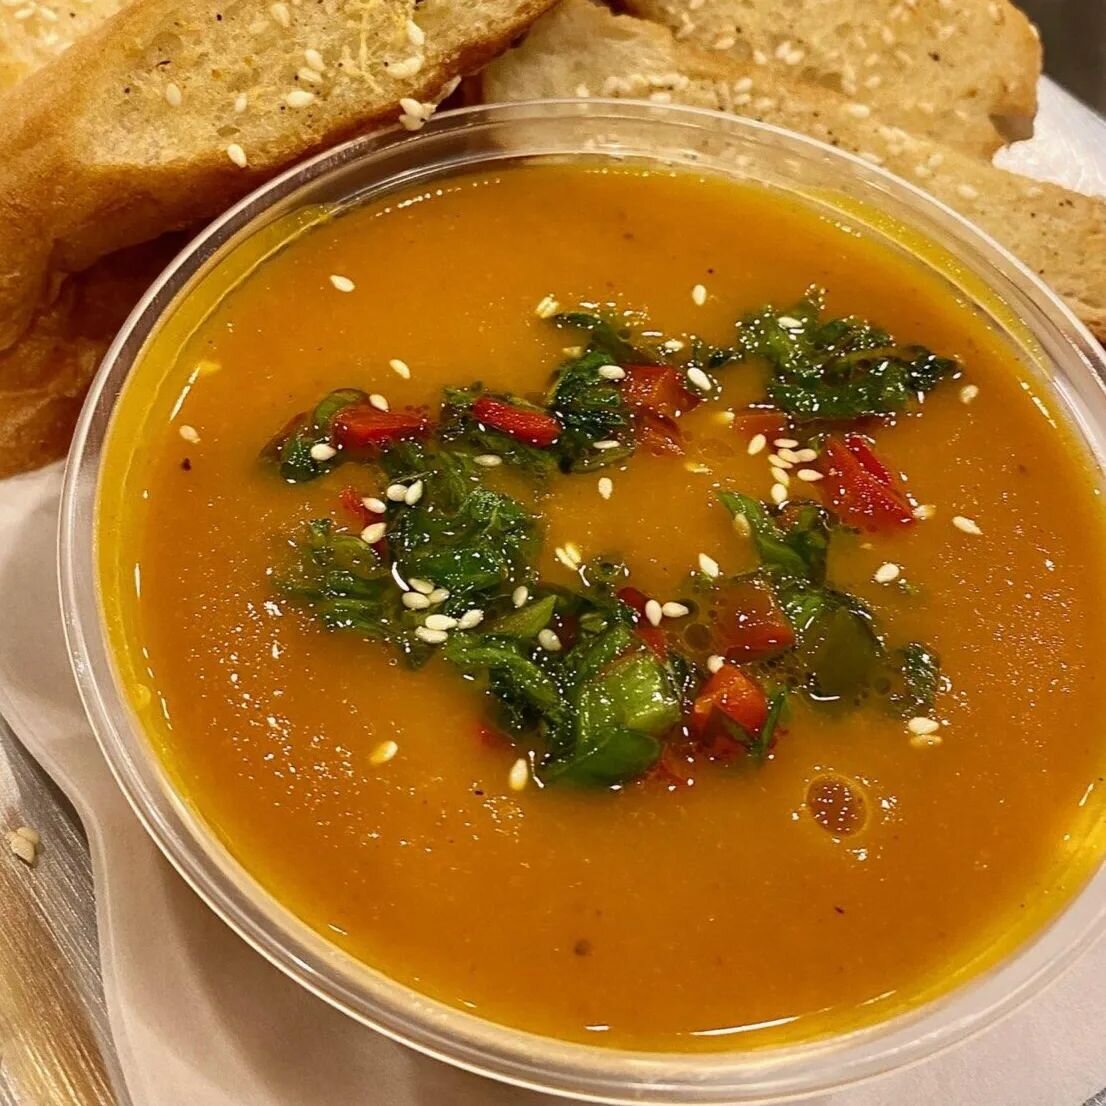 Carrot ginger soup with sesame garlic toast!!
#rvafood #rvalunch